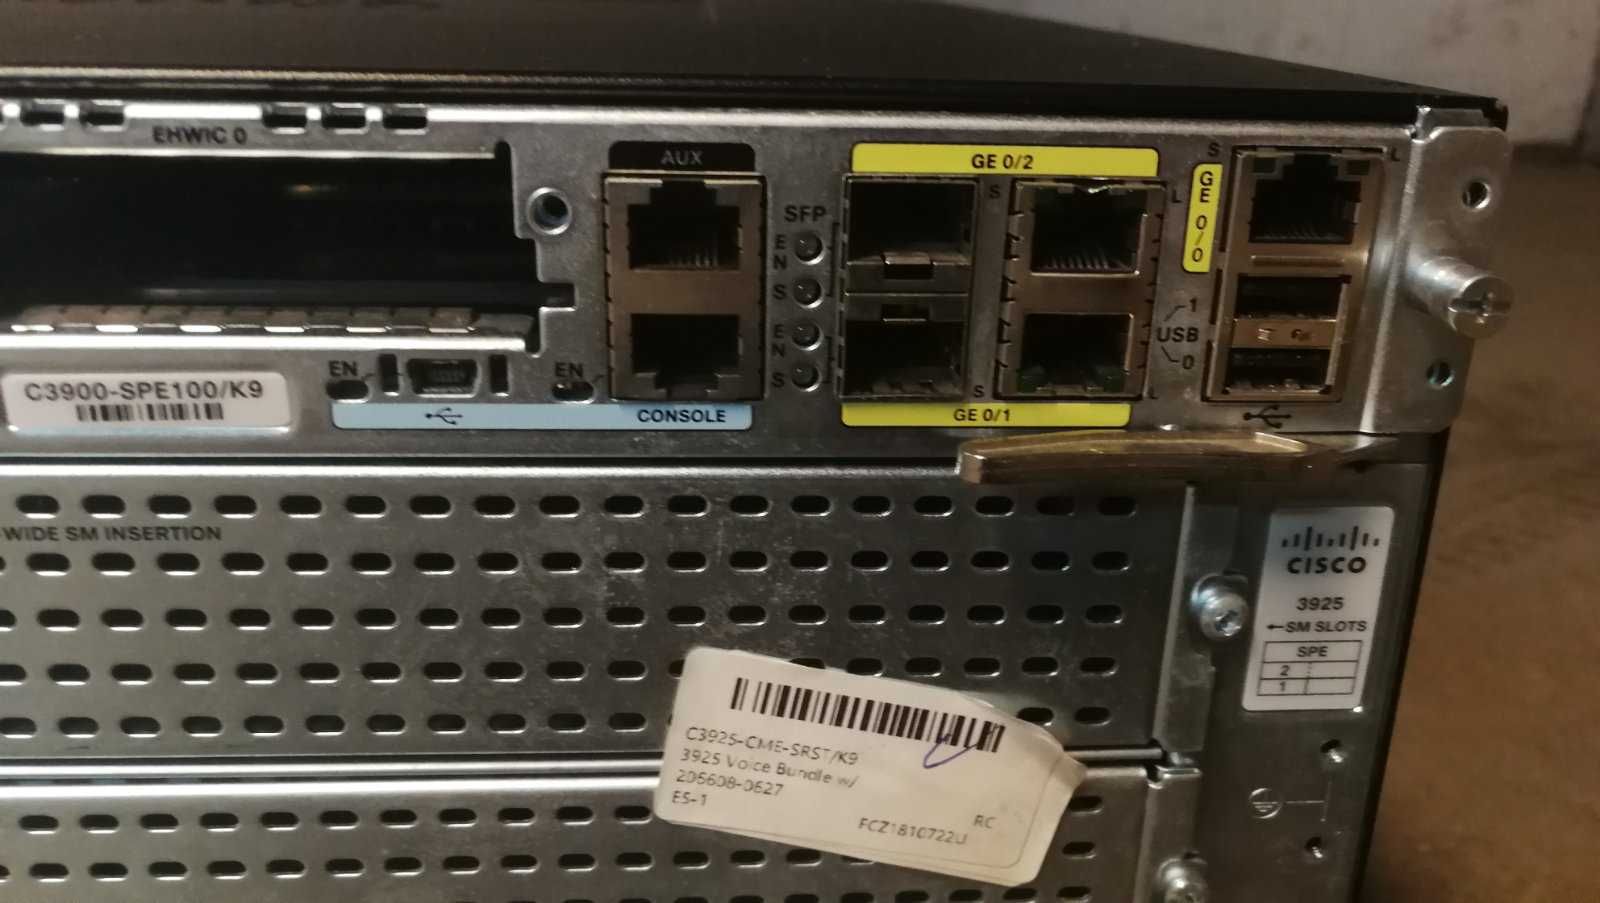 Cisco 3900 Series Integrated Service Router